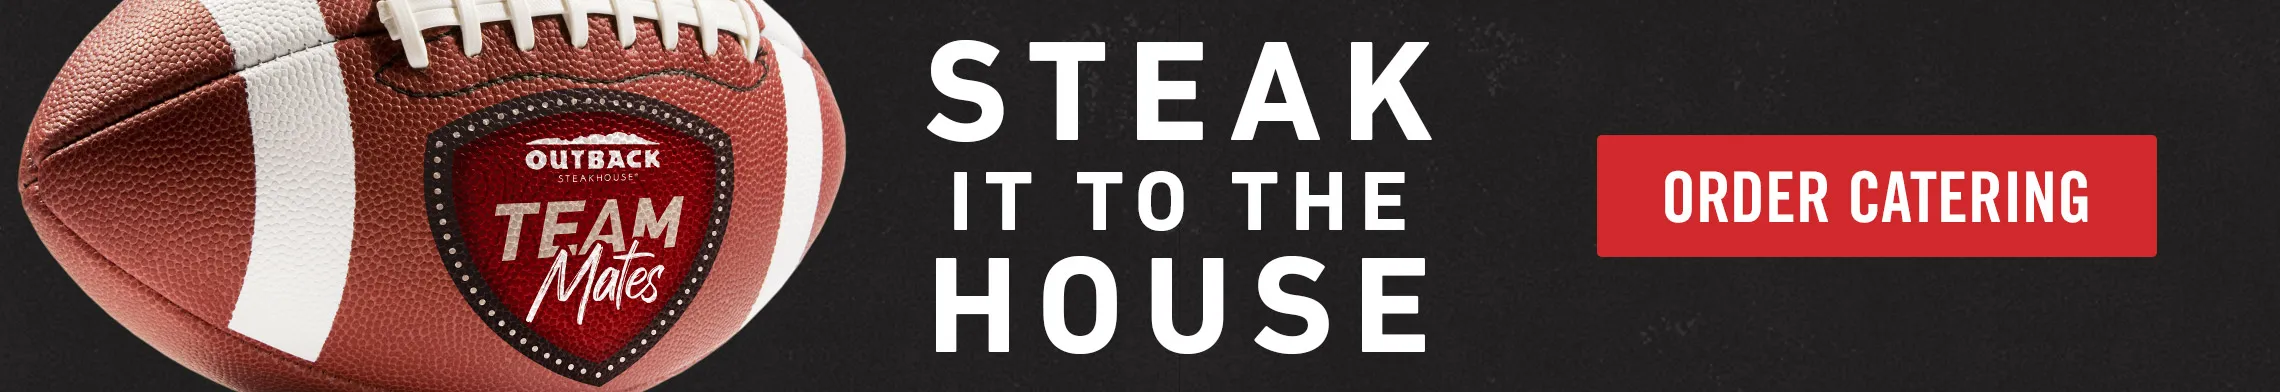 Steak It To The House - Order Catering